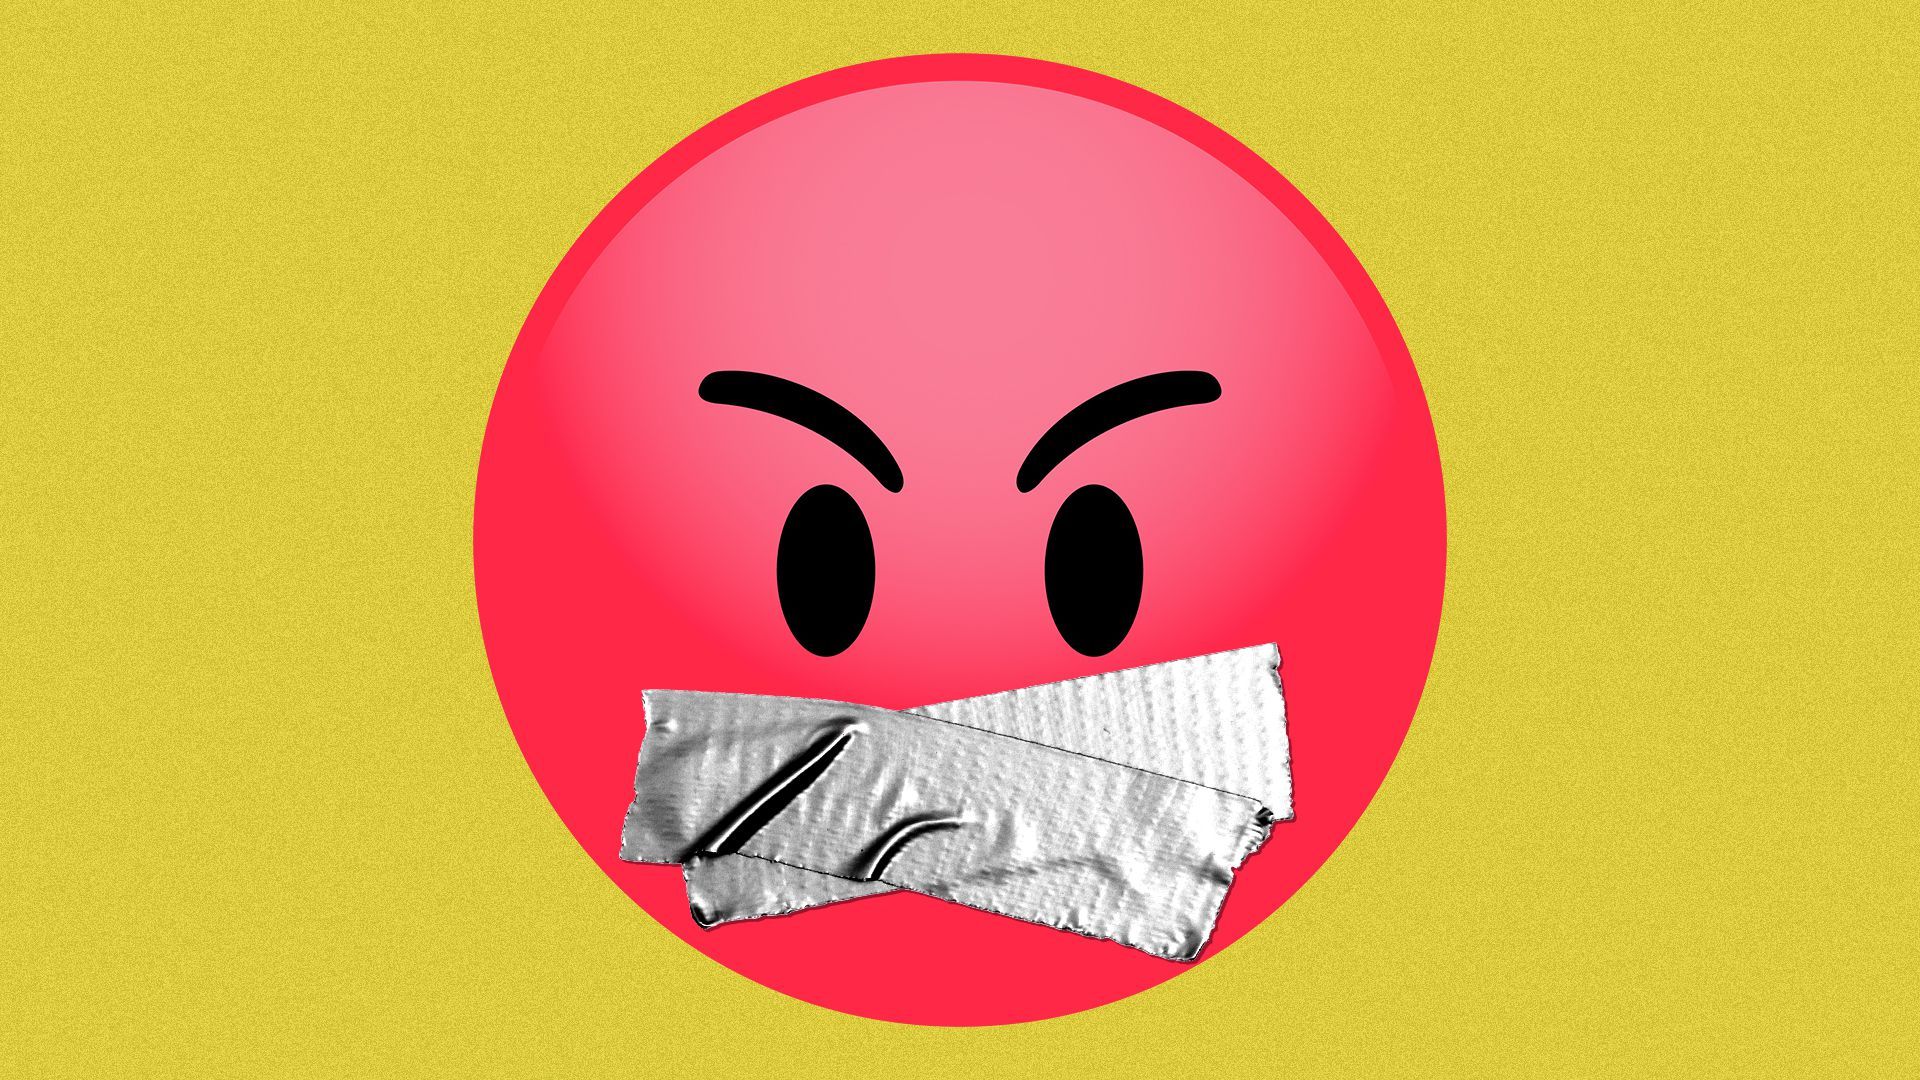 Illustration of an angry emoji with duct tape over its mouth.